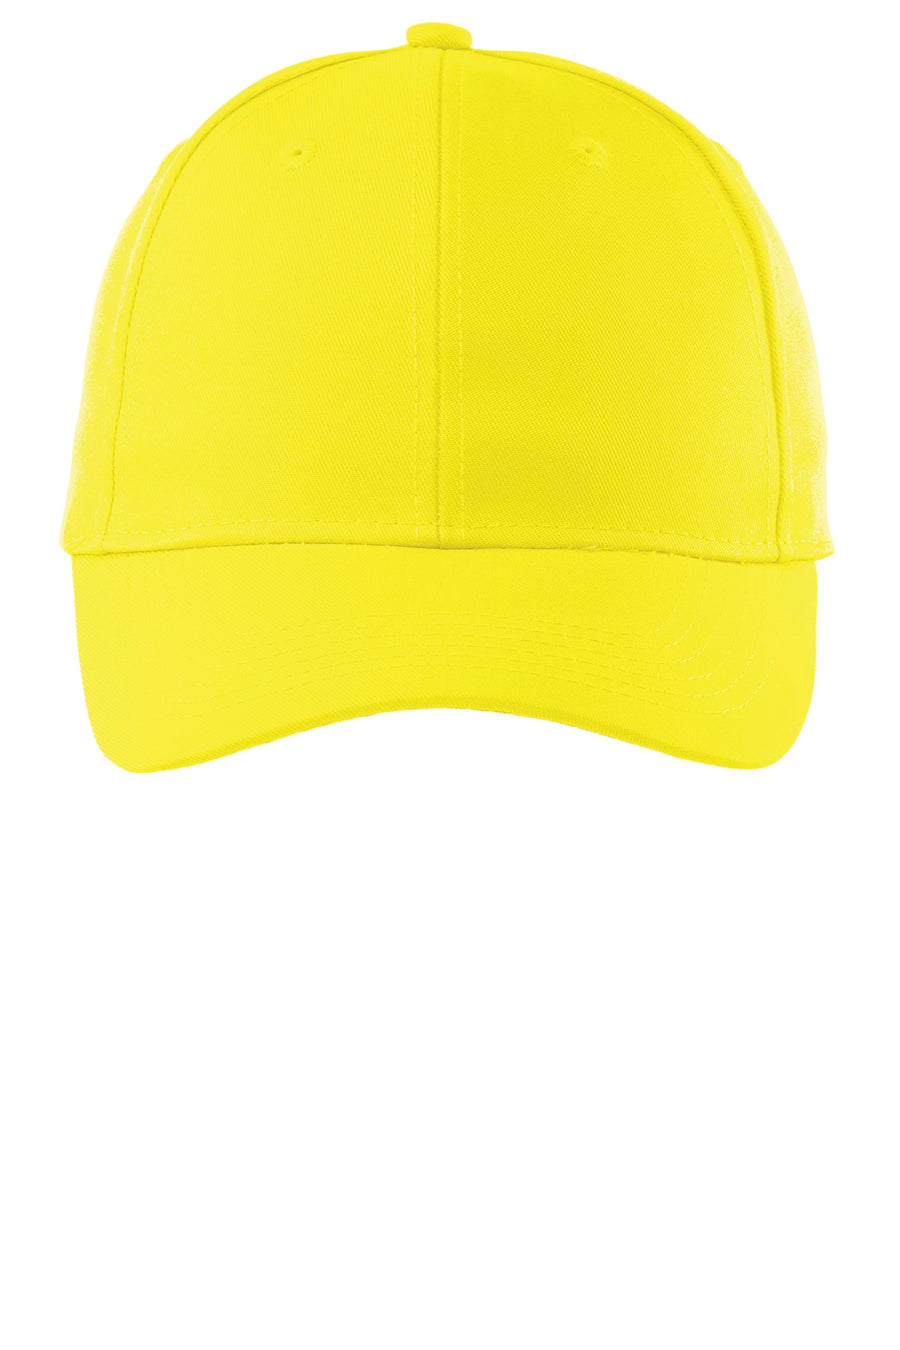 C806-Safety Yellow-front_flat